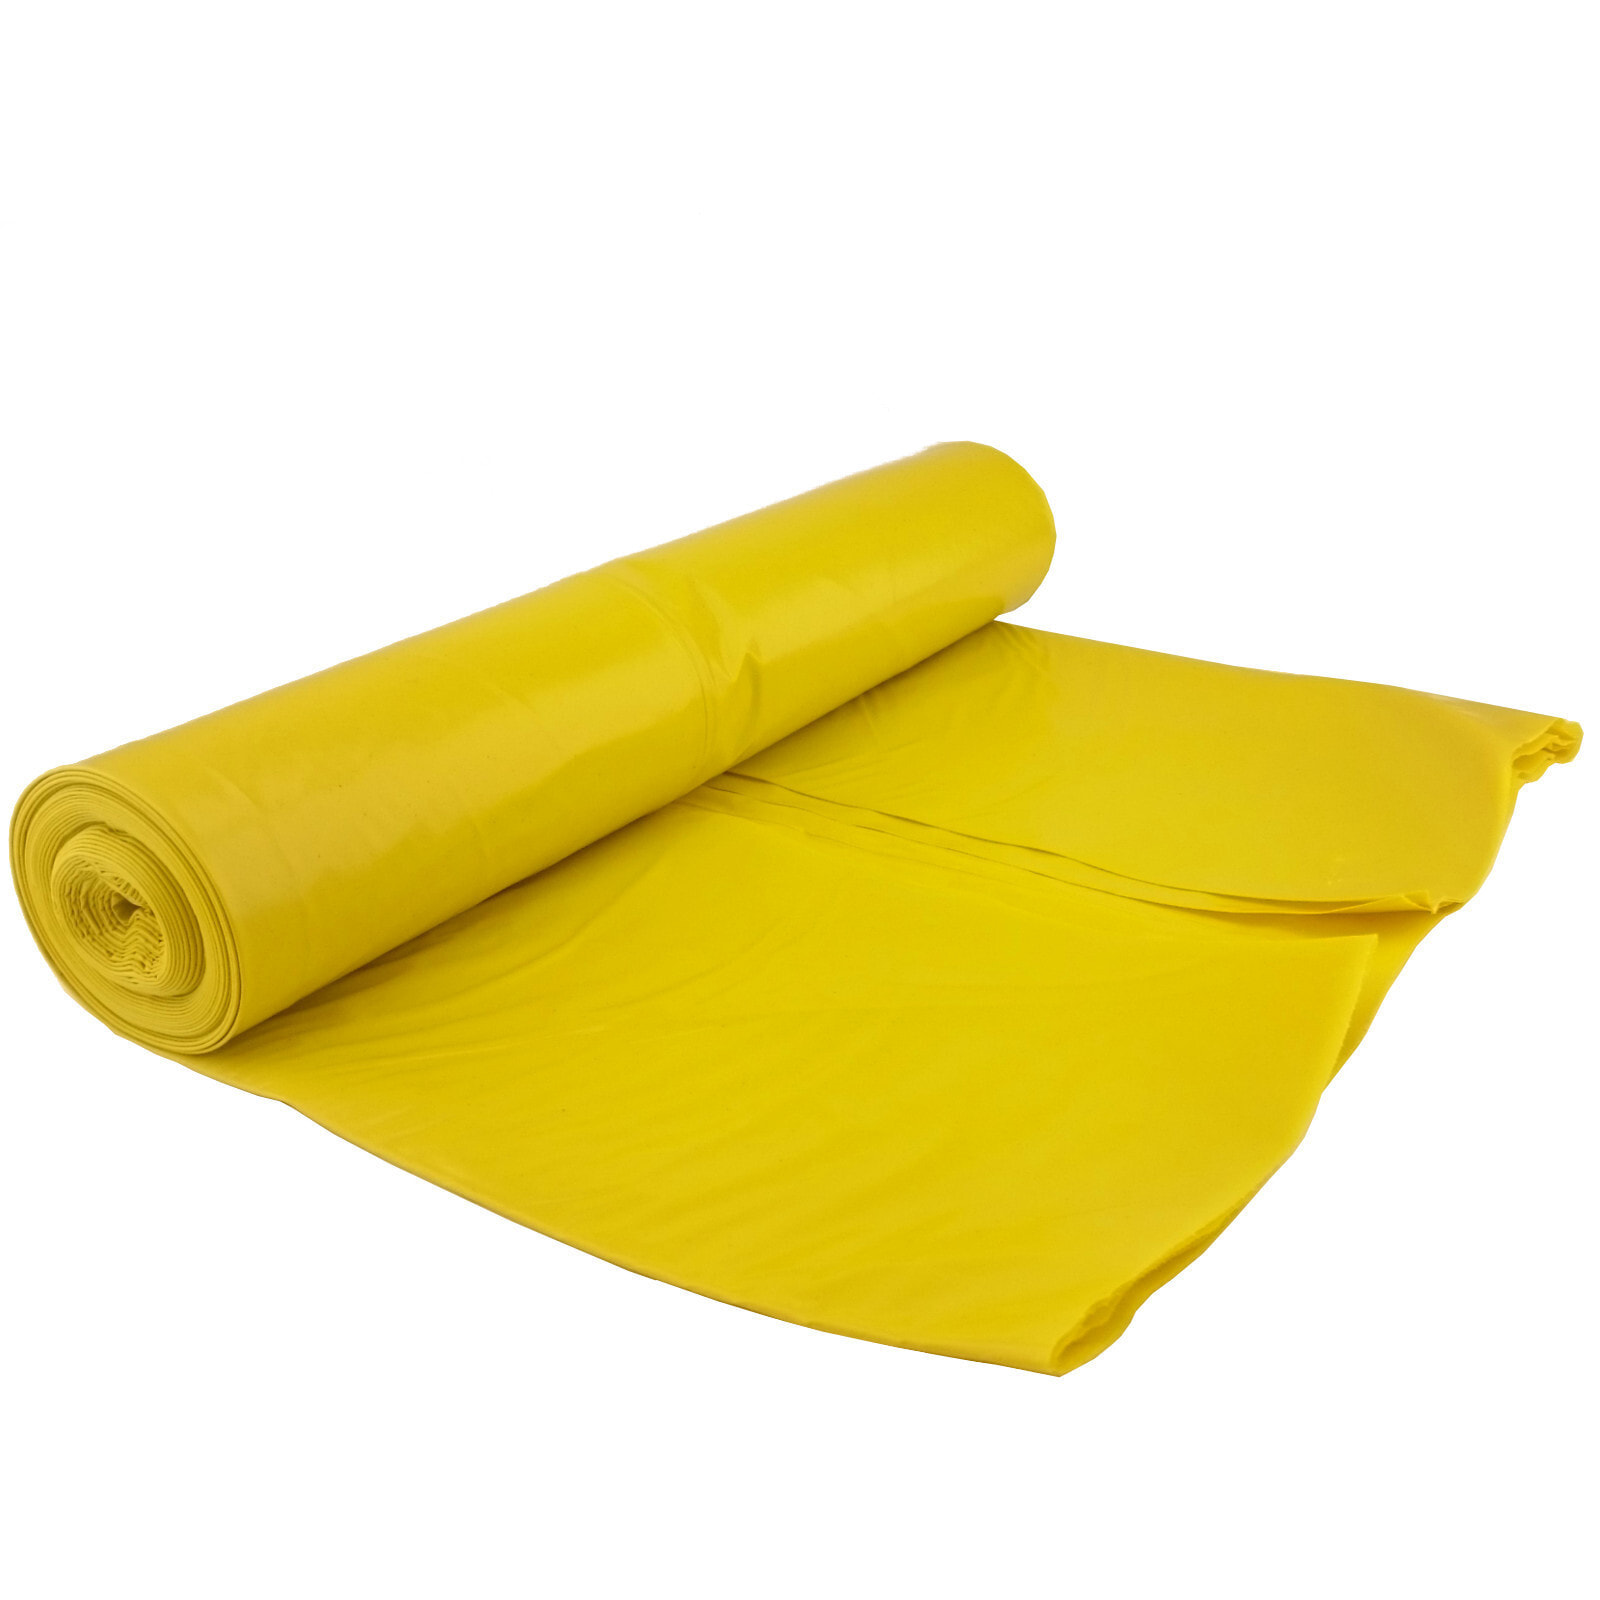 50 micron thick garbage bags. durable roll 25 pcs. - yellow 70L